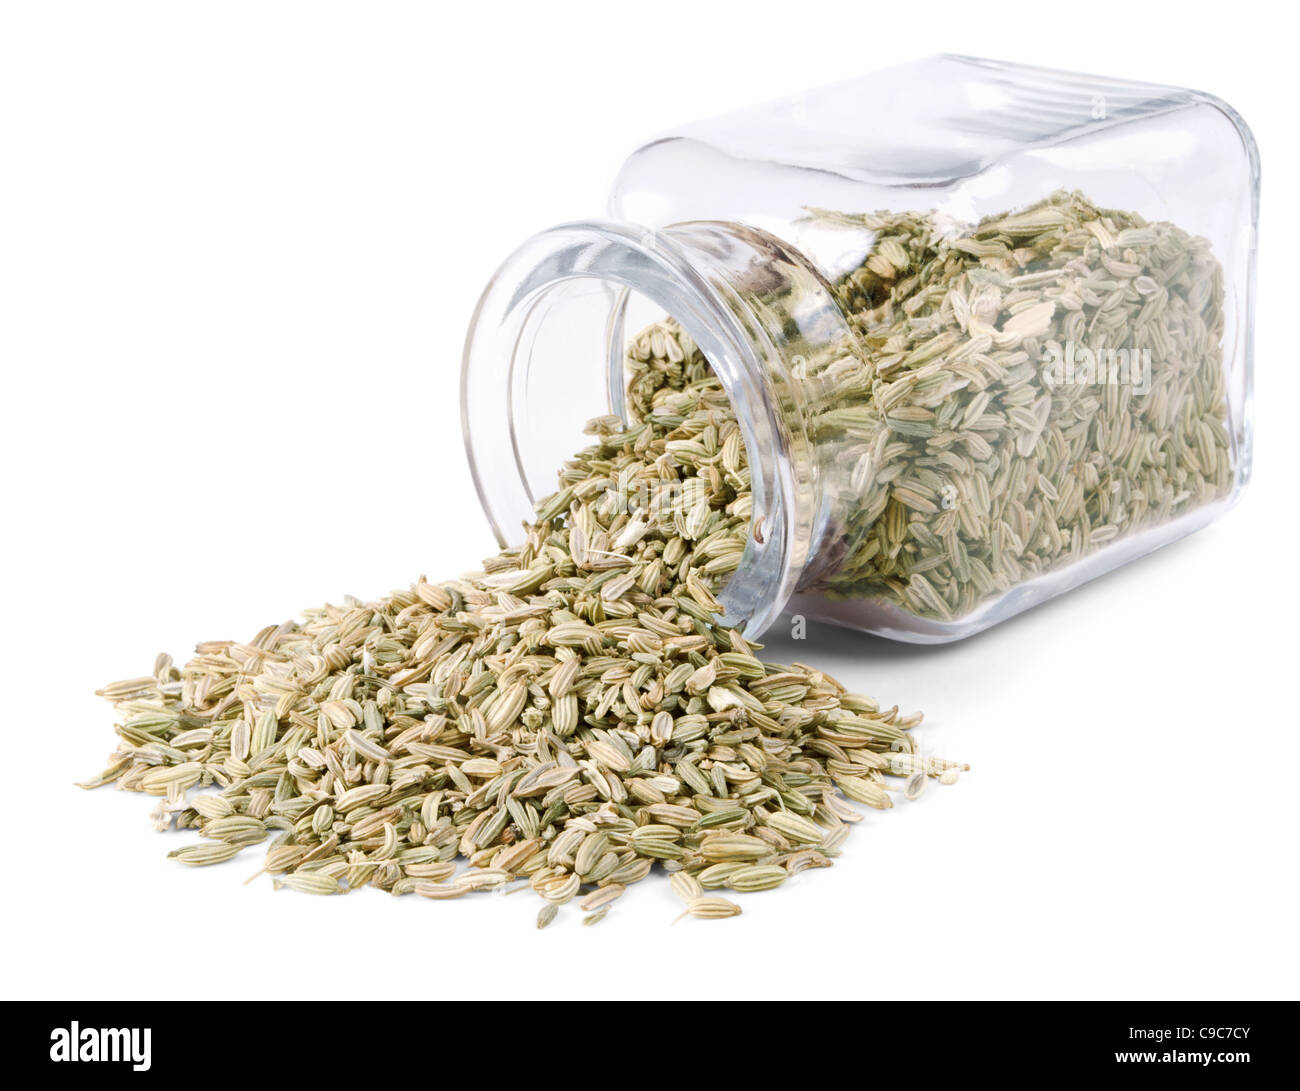 Fennel seeds is scattered on a white background from glass bottle Stock Photo